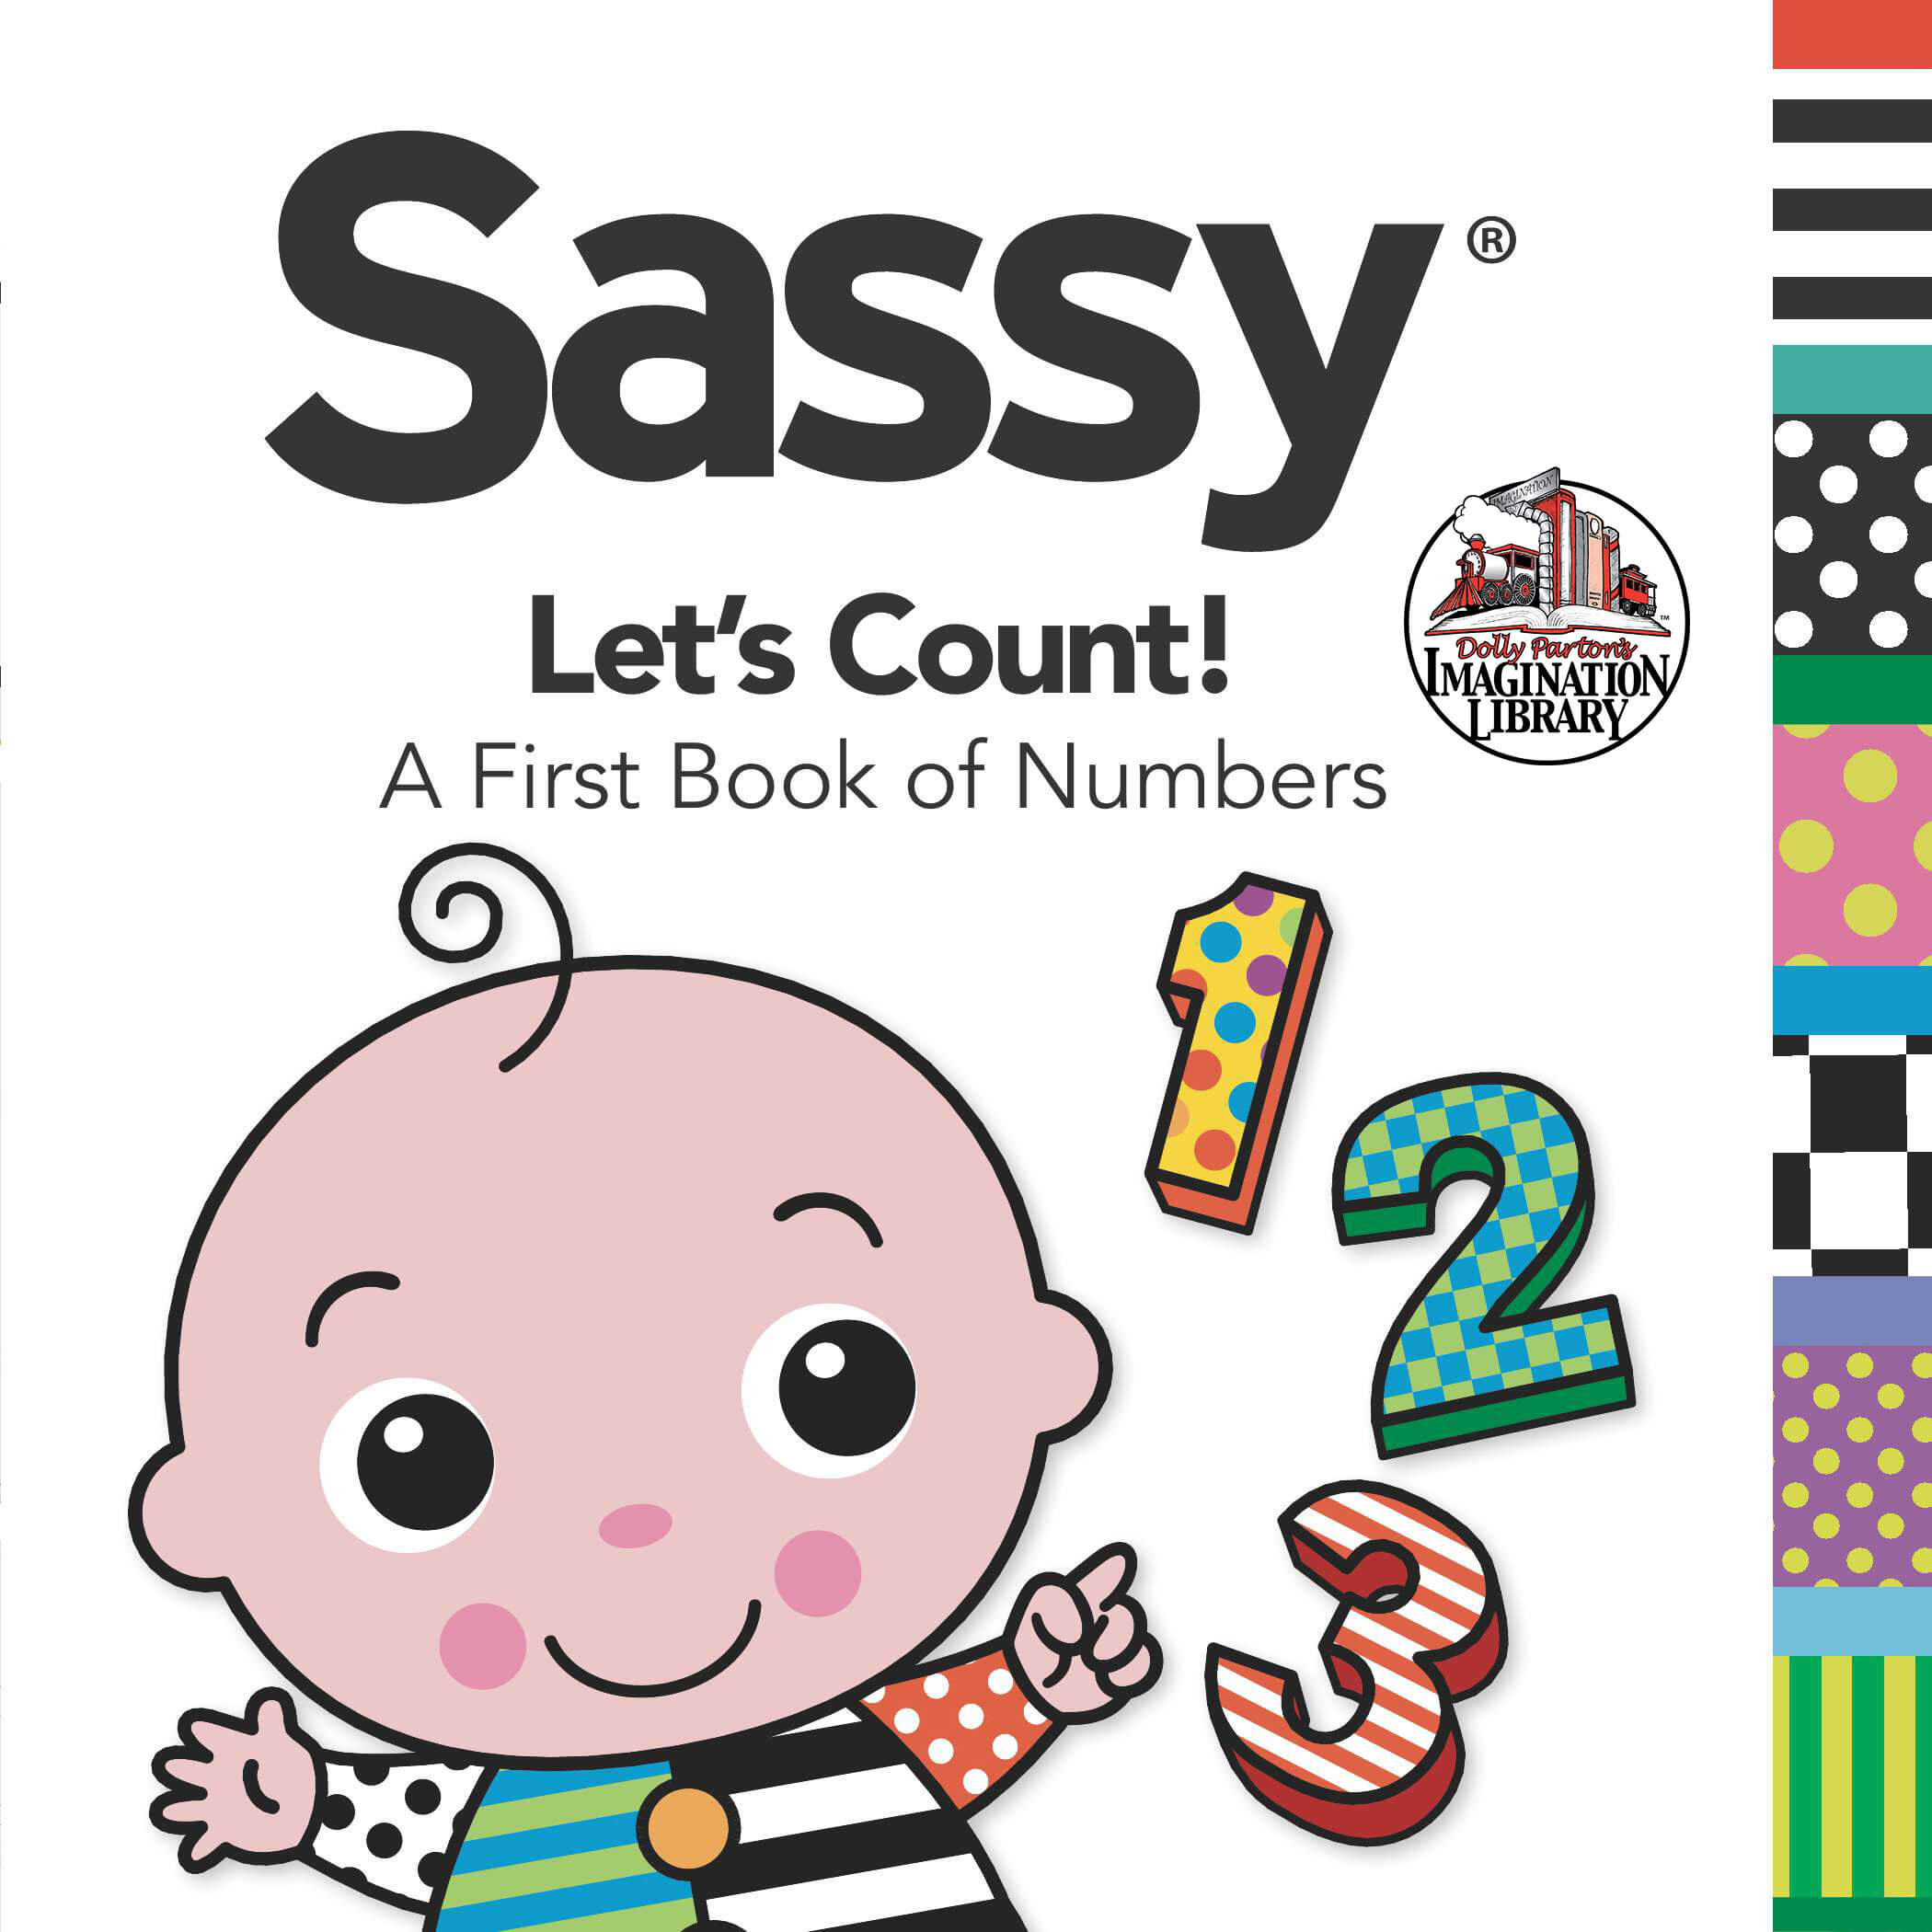 Sassy Let's Count - Dolly Parton's Imagination Library